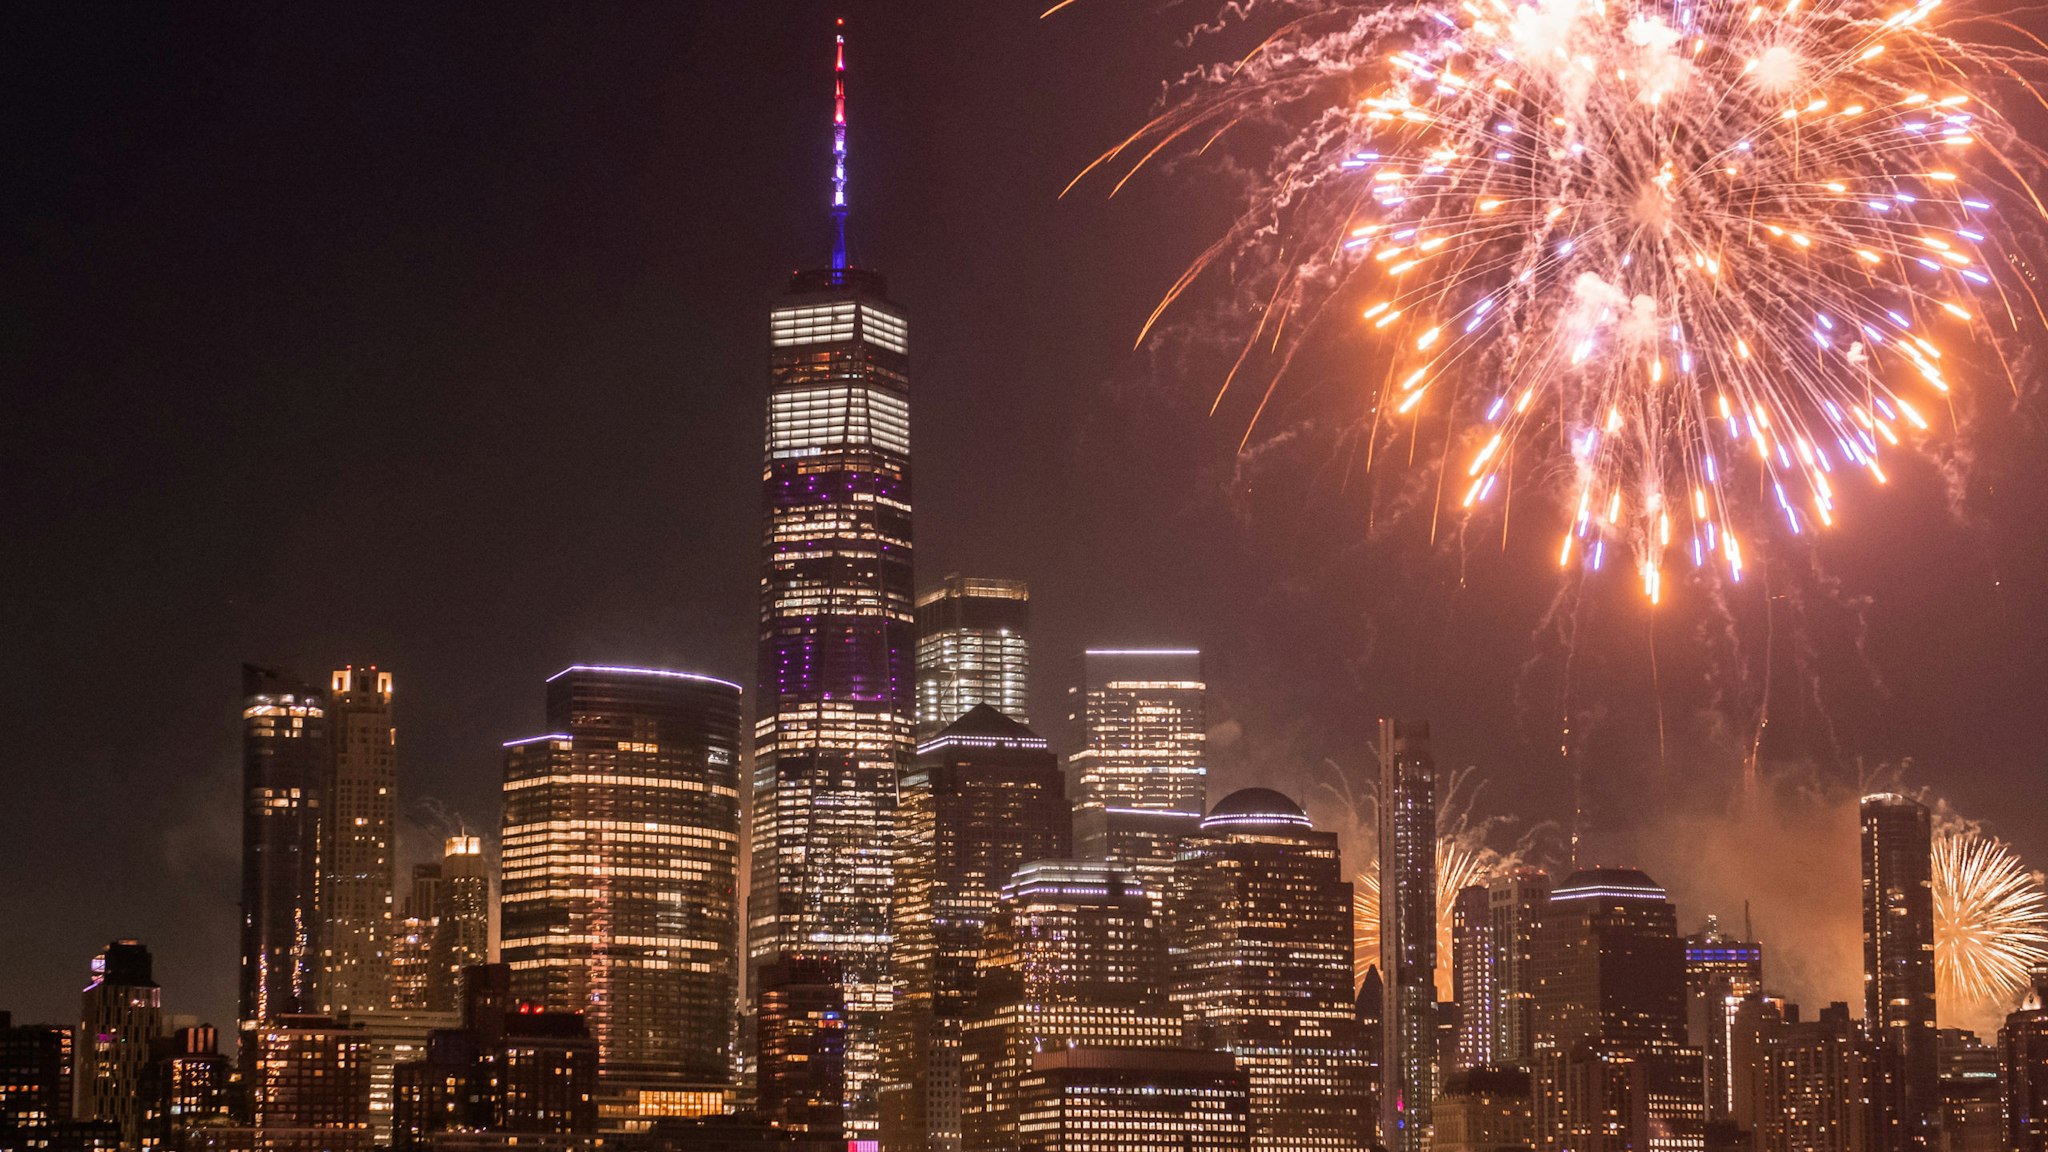 NEW YORK, NEW YORK - JULY 04: A view of the fireworks during the 43rd Annual Macy's 4th of July Fireworks on July 04, 2019 in New York City. (Photo by Noam Galai/Getty Images)